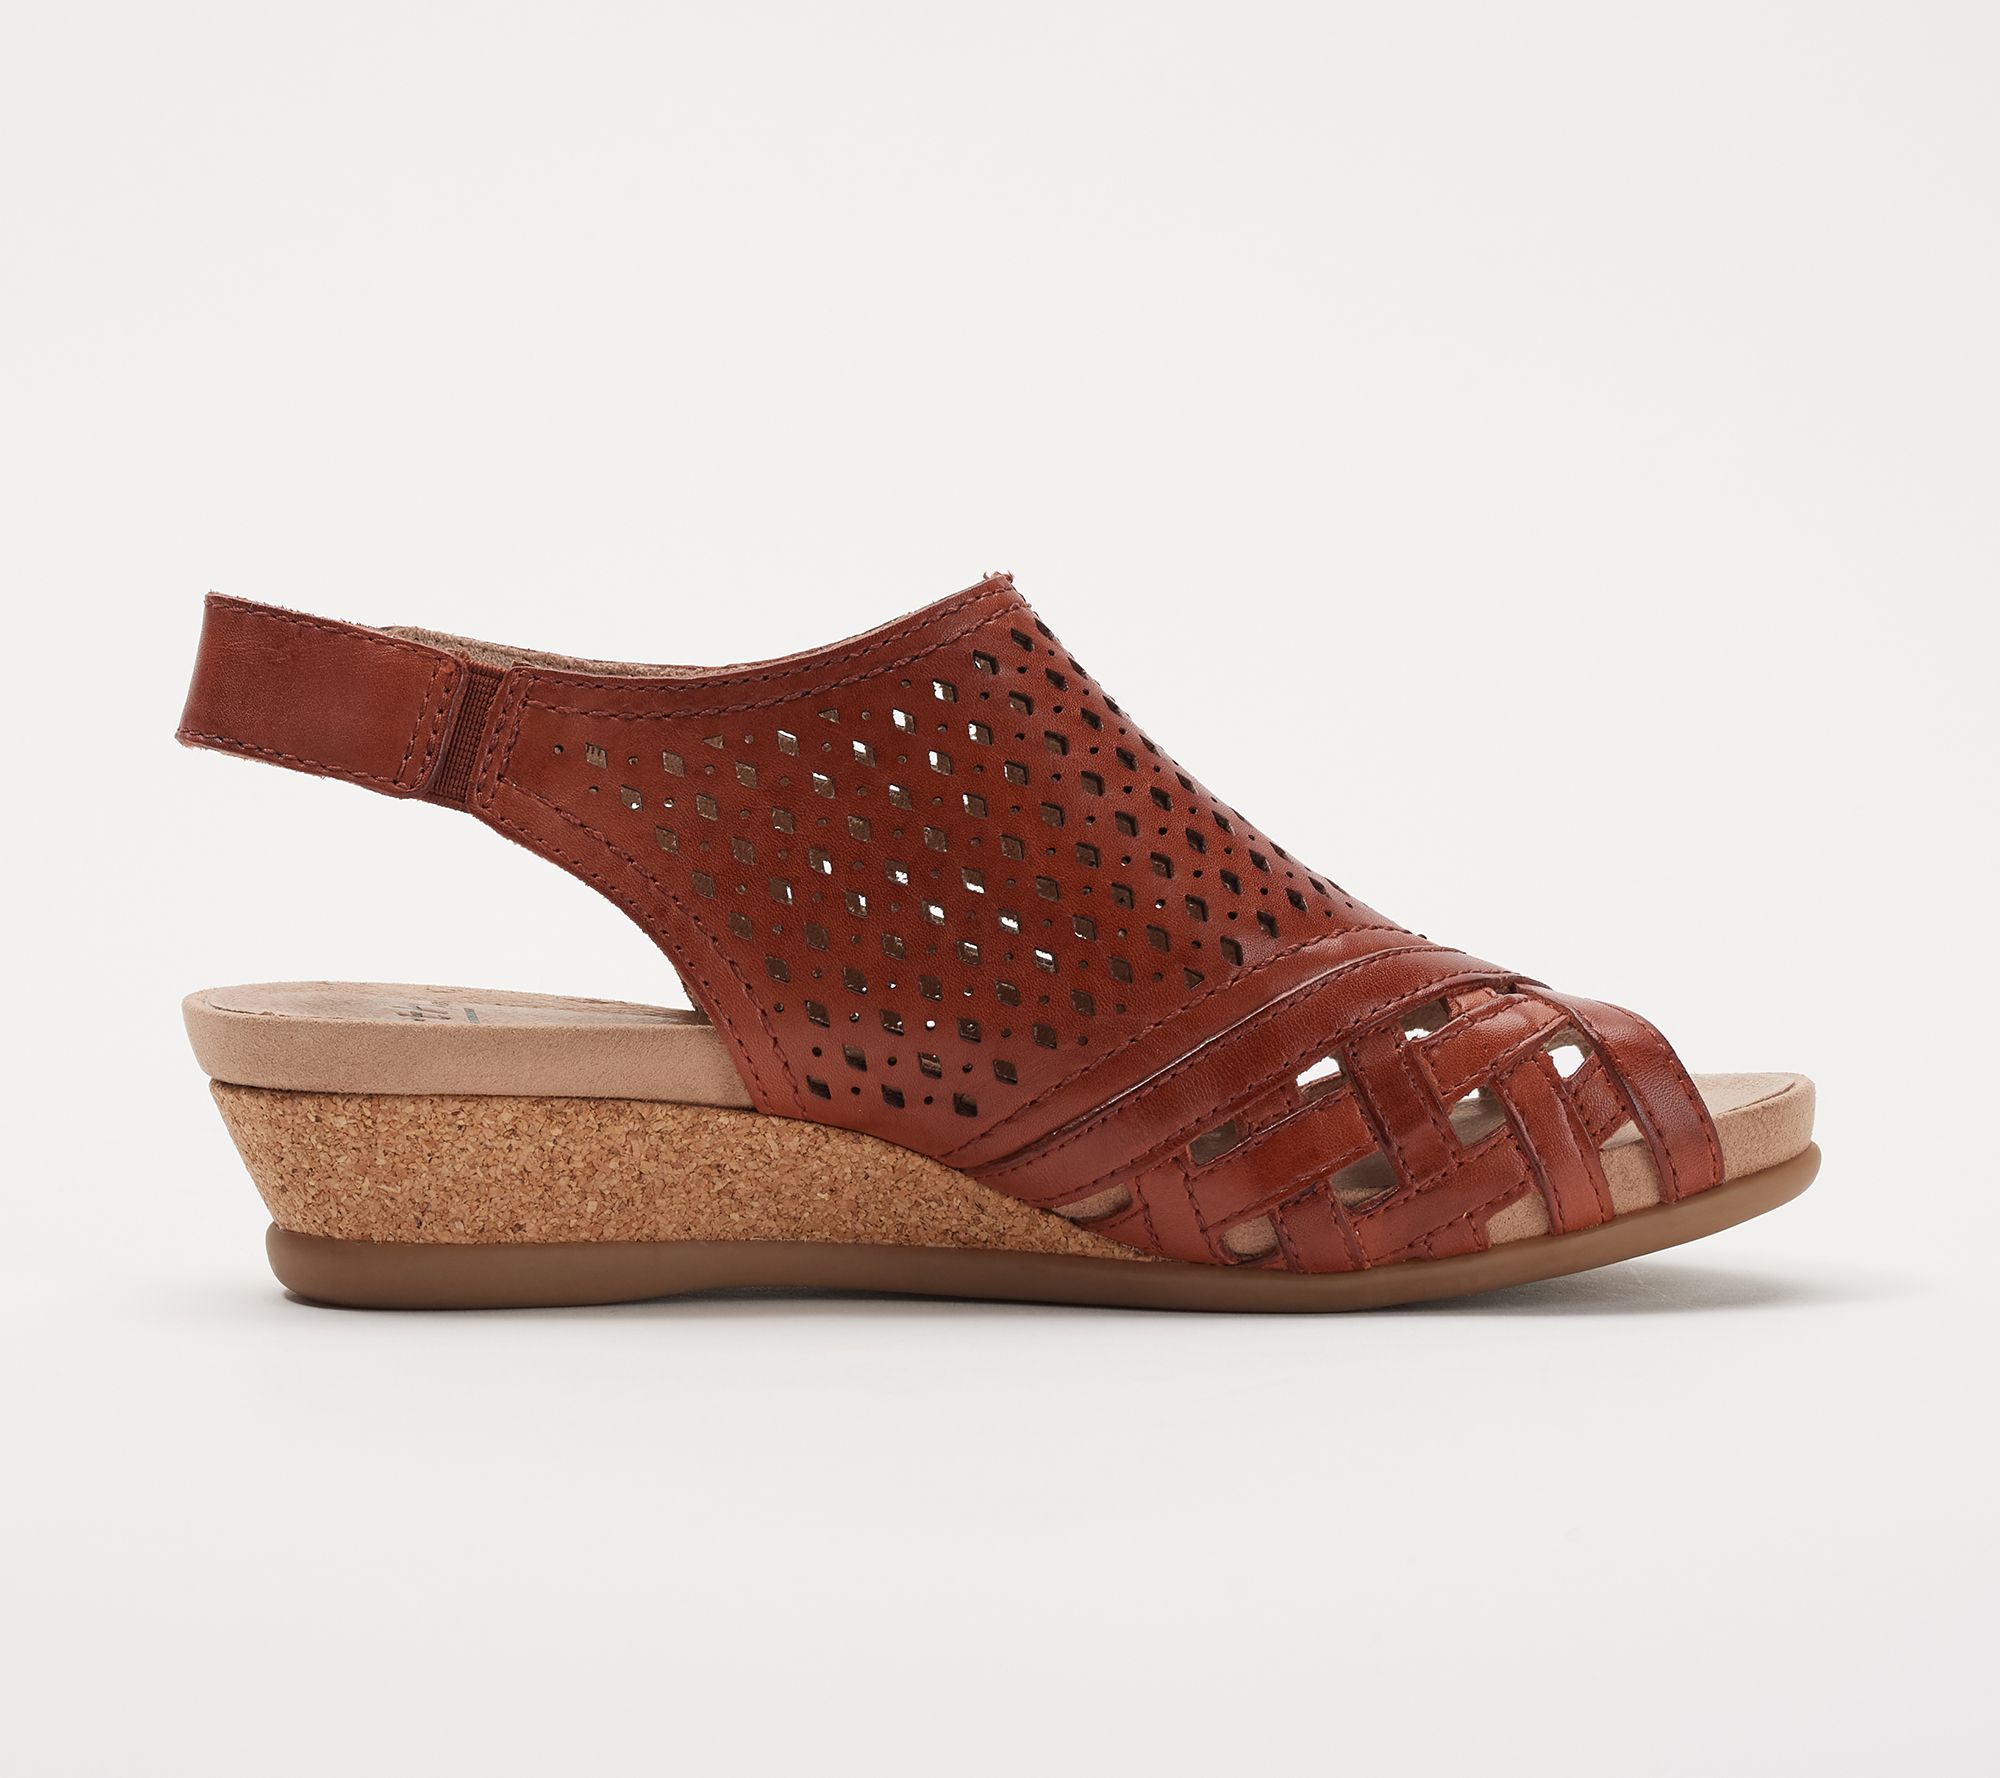 Details about   EARTH Women's Pisa Galli Perforated Wedge Sandals Genuine Leather Various